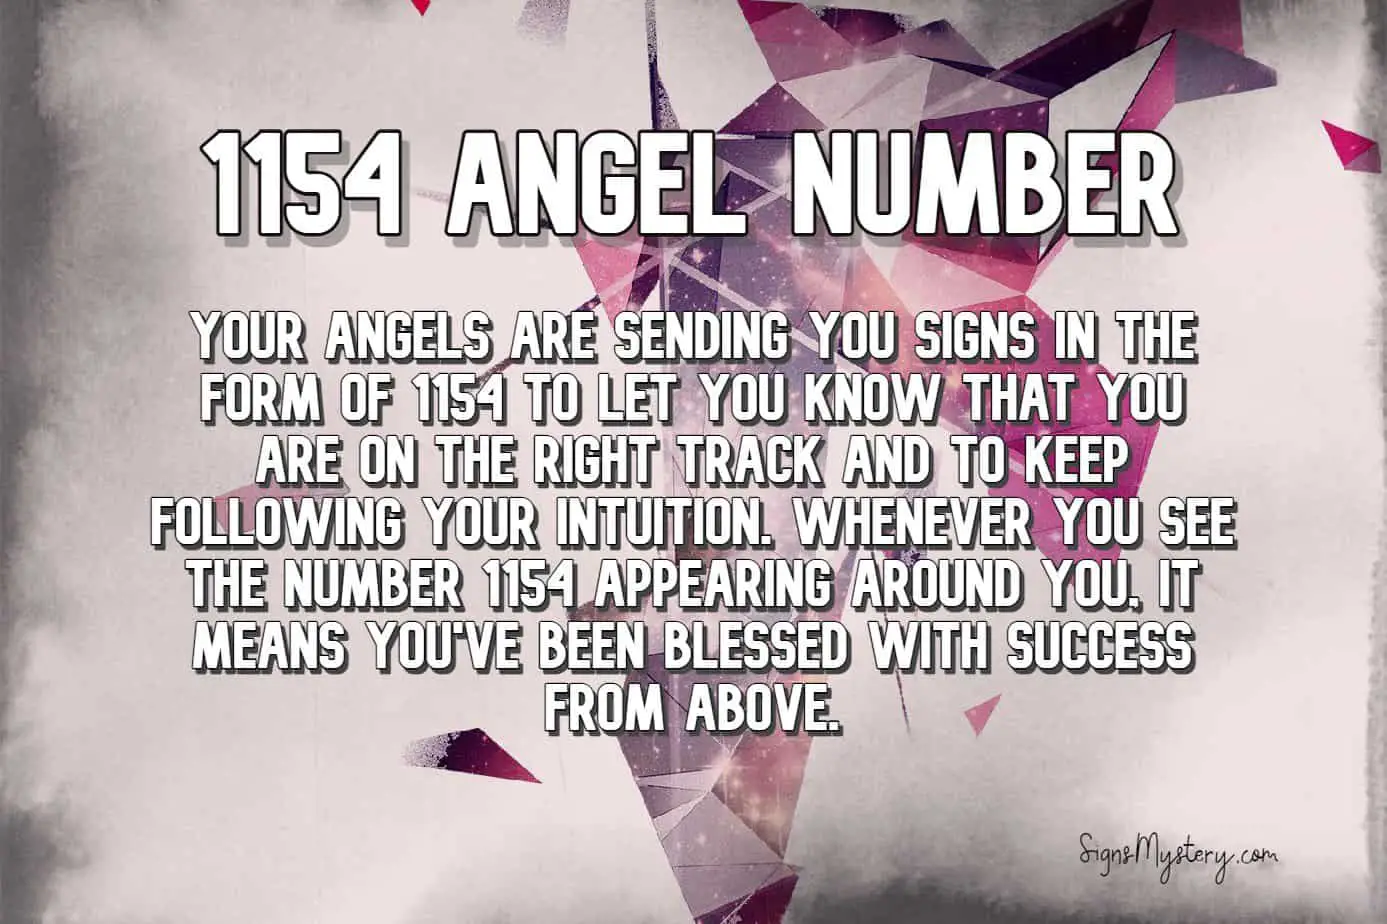 1154 angel number meaning